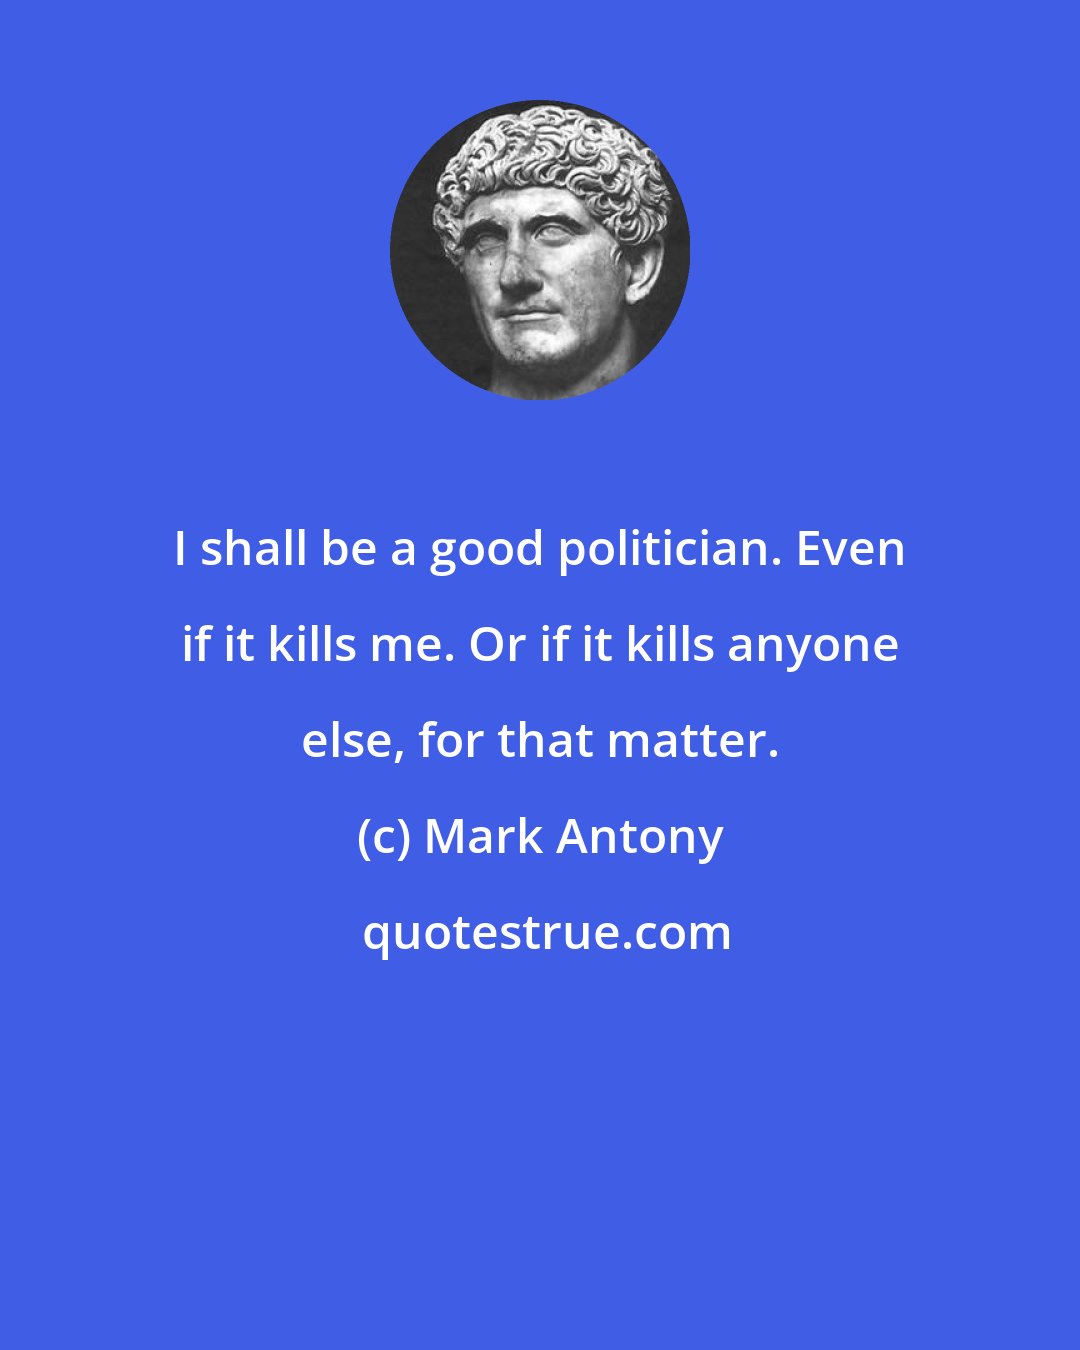 Mark Antony: I shall be a good politician. Even if it kills me. Or if it kills anyone else, for that matter.